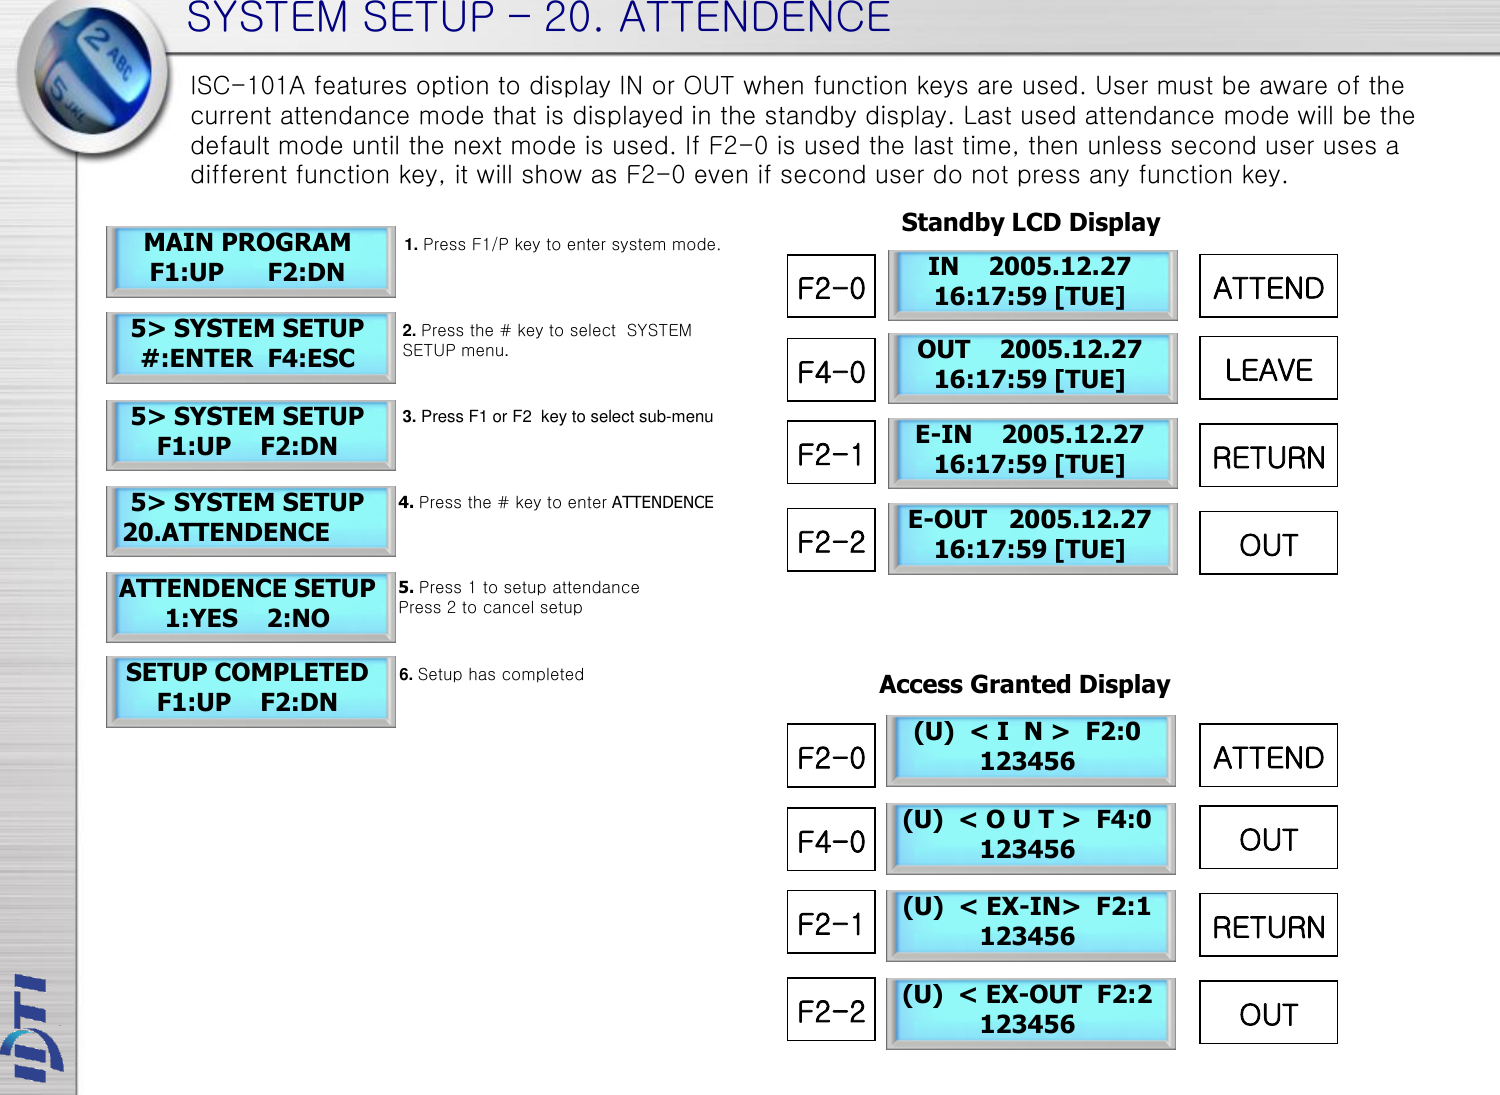 SYSTEM SETUP – 20. ATTENDENCE 5&gt; SYSTEM SETUP  20.ATTENDENCE ATTENDENCE SETUP 1:YES    2:NO SETUP COMPLETED F1:UP    F2:DN 5&gt; SYSTEM SETUP F1:UP    F2:DN 5. Press 1 to setup attendance Press 2 to cancel setup 4. Press the # key to enter ATTENDENCE IN    2005.12.27 16:17:59 [TUE] MAIN PROGRAM F1:UP      F2:DN 5&gt; SYSTEM SETUP #:ENTER  F4:ESC 1. Press F1/P key to enter system mode. 2. Press the # key to select  SYSTEM SETUP menu. 3. Press F1 or F2  key to select sub-menu 6. Setup has completed ISC-101A features option to display IN or OUT when function keys are used. User must be aware of the current attendance mode that is displayed in the standby display. Last used attendance mode will be the default mode until the next mode is used. If F2-0 is used the last time, then unless second user uses a different function key, it will show as F2-0 even if second user do not press any function key. OUT    2005.12.27 16:17:59 [TUE] E-IN    2005.12.27 16:17:59 [TUE] E-OUT   2005.12.27 16:17:59 [TUE] F2-0 F4-0 F2-1 F2-2 ATTEND LEAVE RETURN OUT (U)  &lt; I  N &gt;  F2:0  123456 (U)  &lt; O U T &gt;  F4:0  123456 (U)  &lt; EX-IN&gt;  F2:1  123456 (U)  &lt; EX-OUT  F2:2  123456 F2-0 F4-0 F2-1 F2-2 ATTEND OUT RETURN OUT Standby LCD Display Access Granted Display 